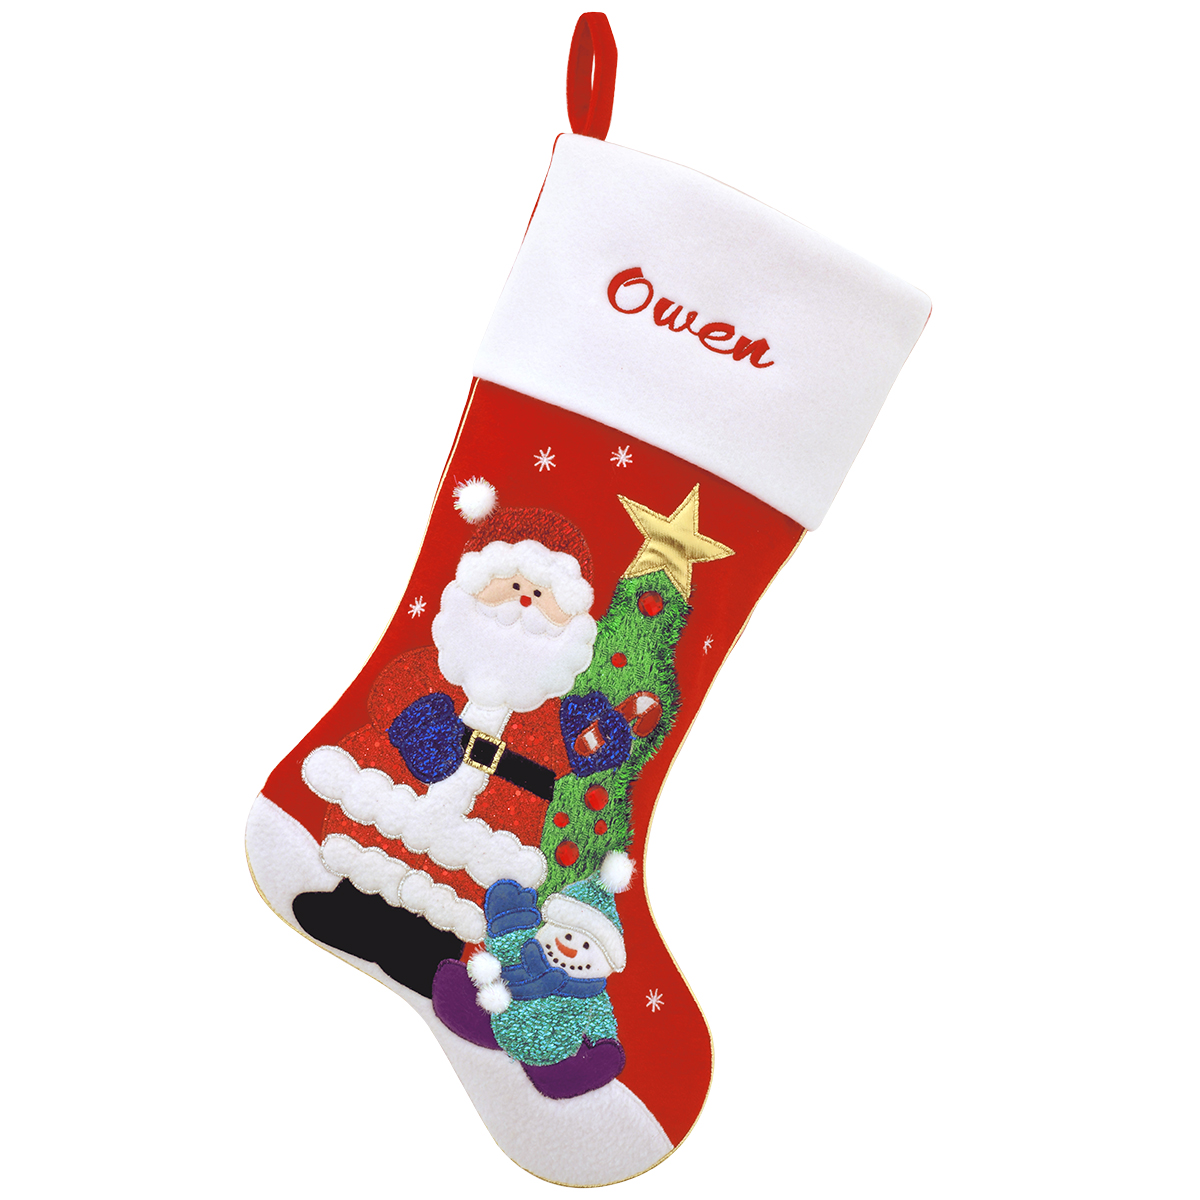 Santa and snowman in front of a Christmas tree on a personalized red velvet stocking with white cuff.